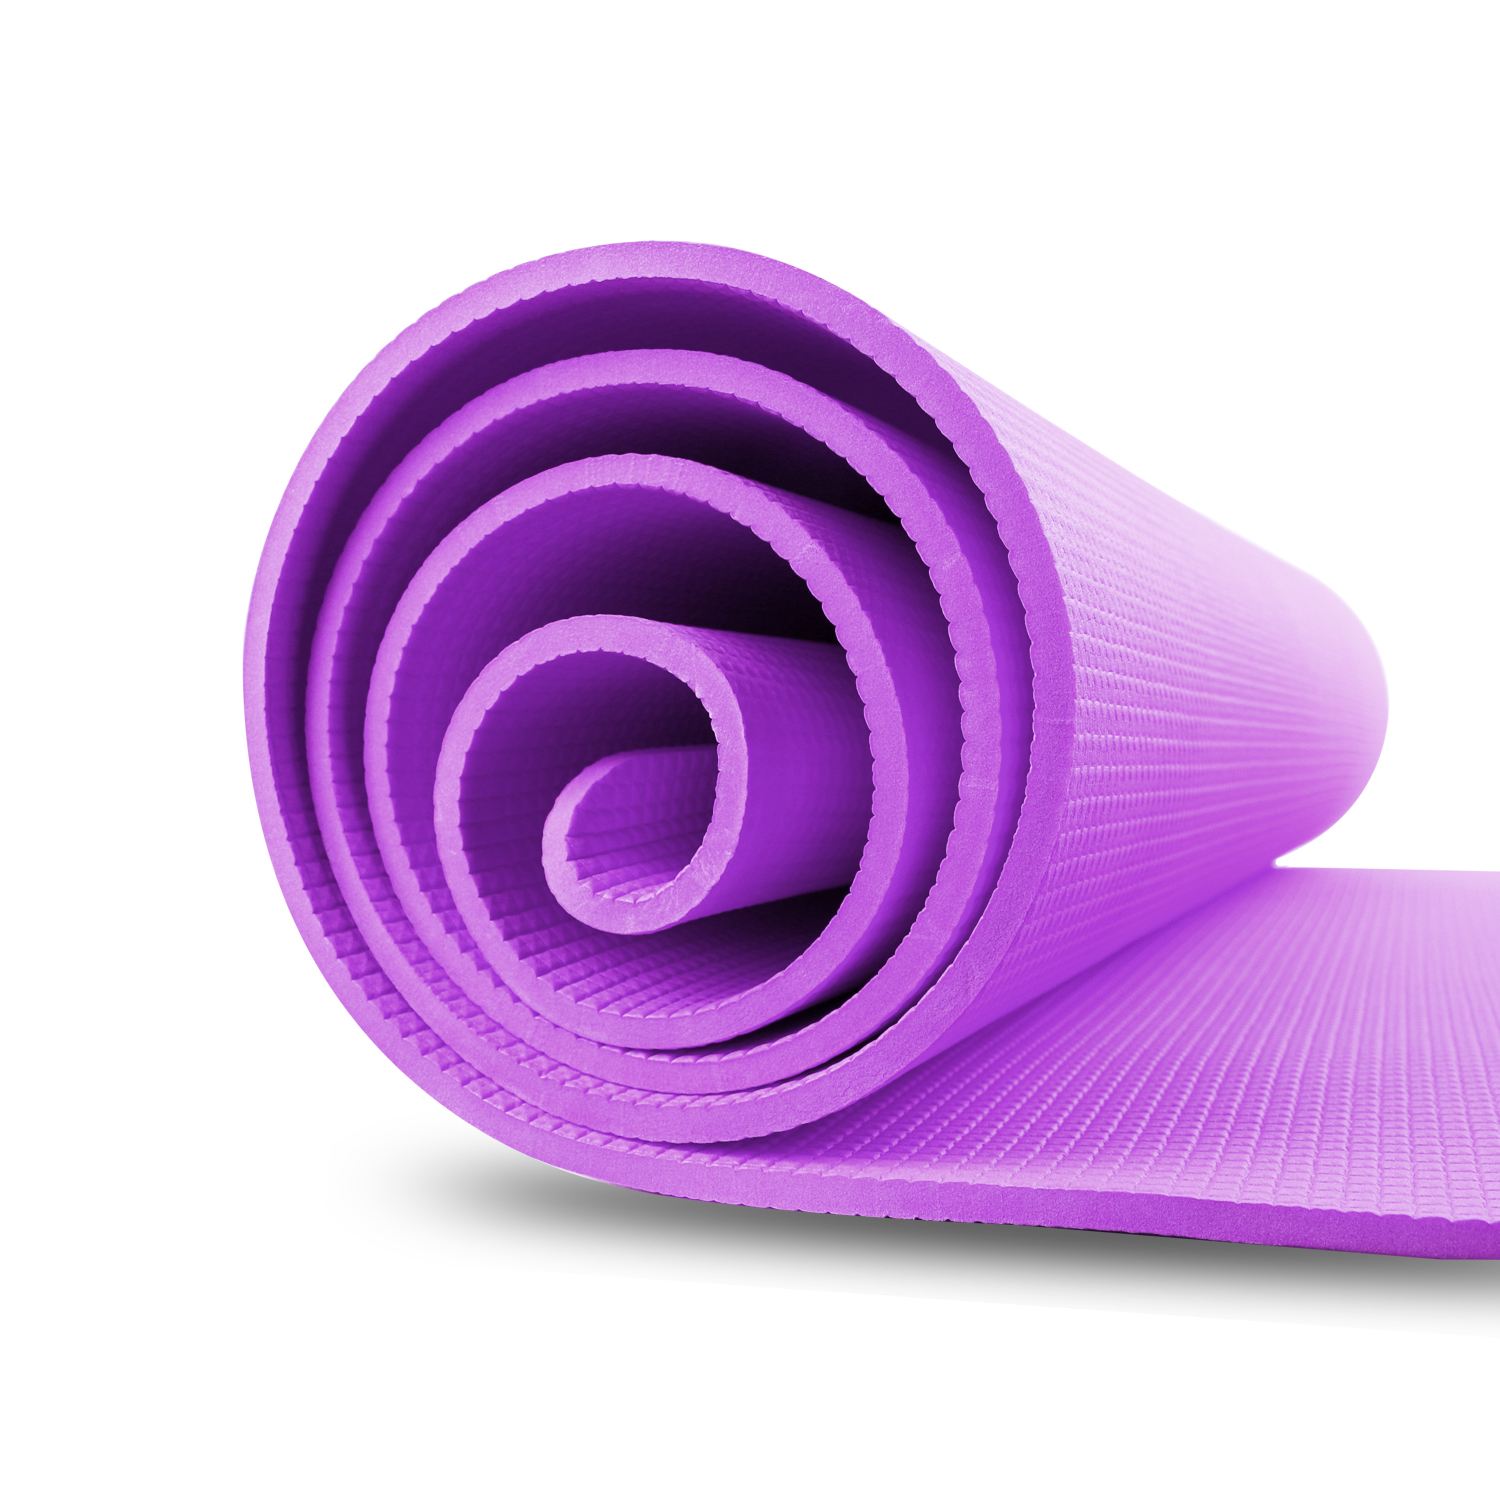 Steelbird Yoga Mat 6mm For Men And Women 6 X 2 Feet Wide Extra Thick Exercise Mat For Workout,Yoga,Fitness,Gym, Pilates And High-Density Anti-Tear Non-Slip Light Weight Mat (Light Violet)